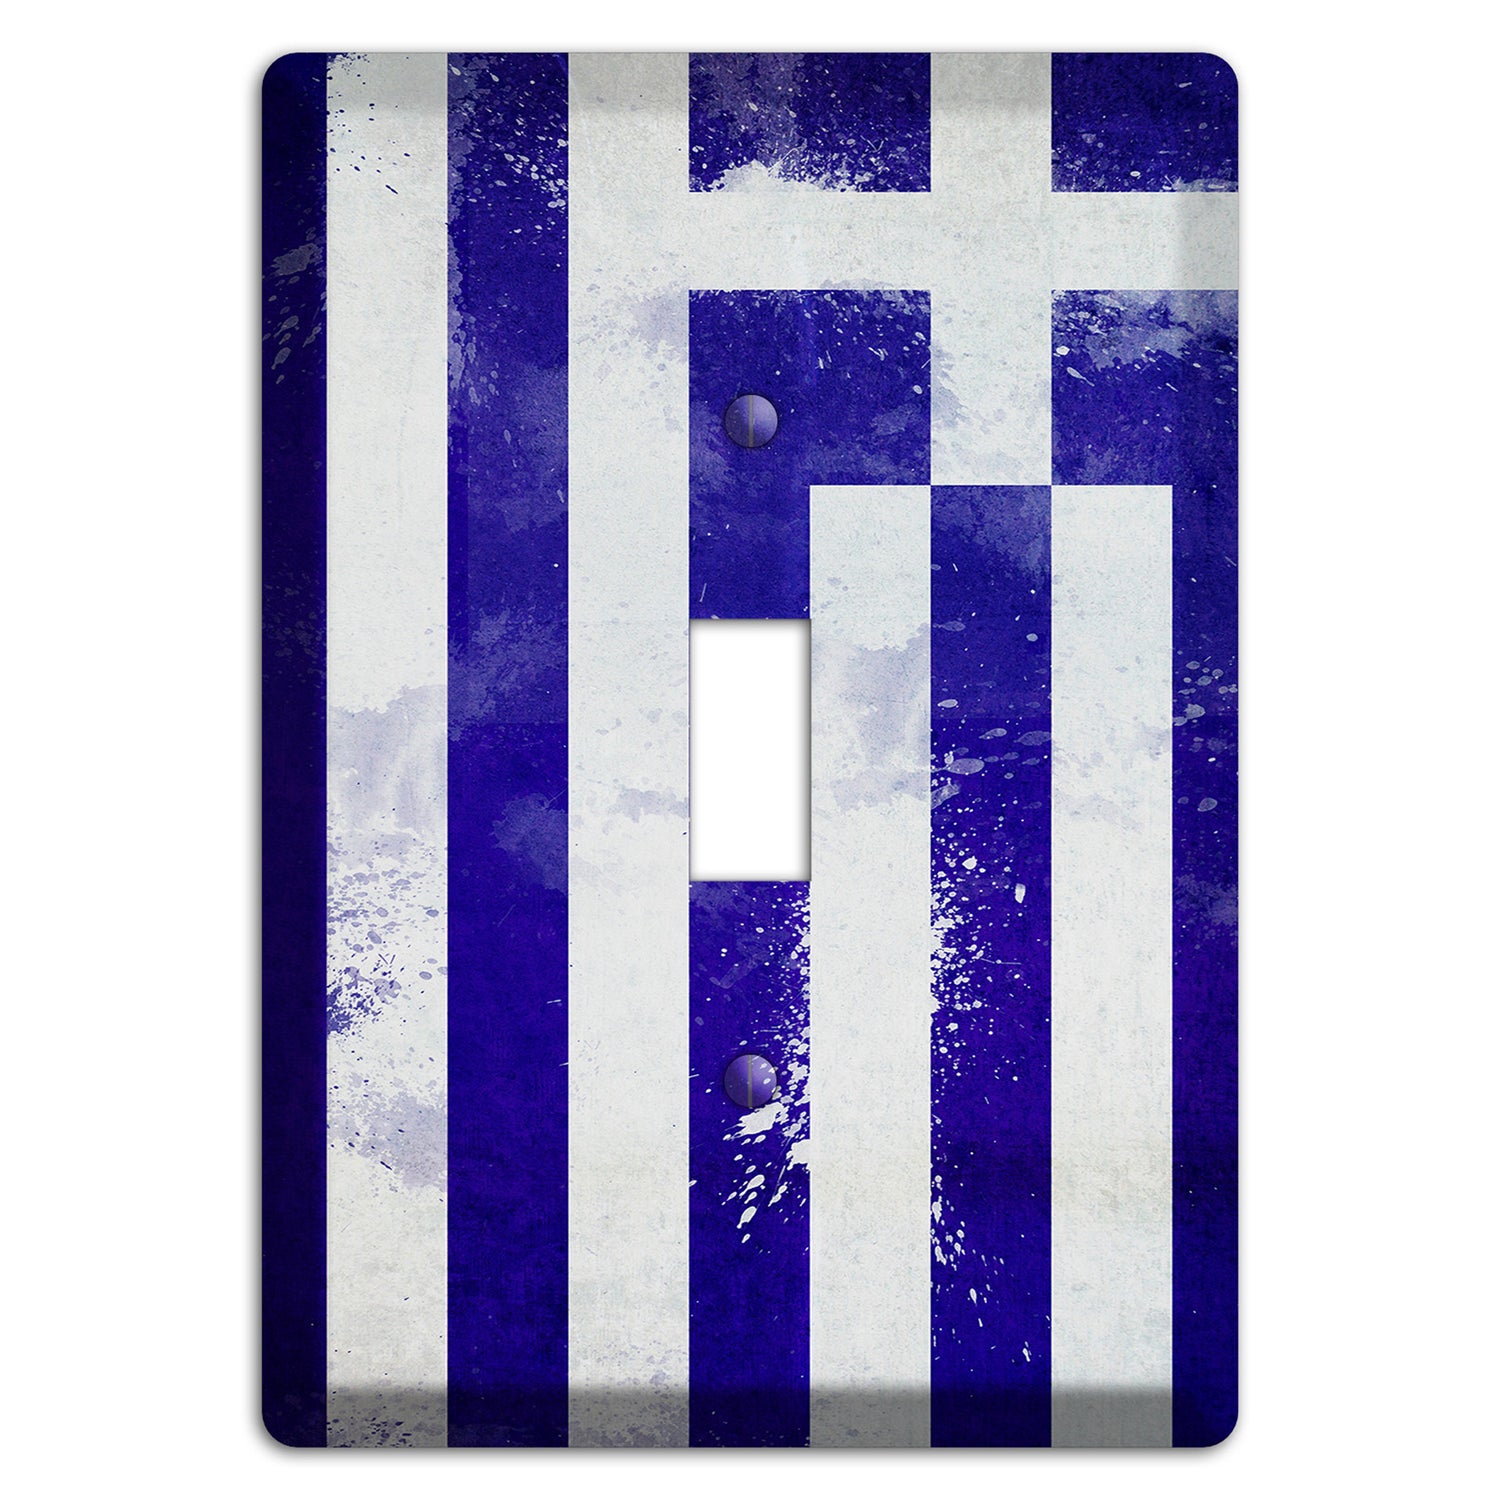 Greece Cover Plates Cover Plates